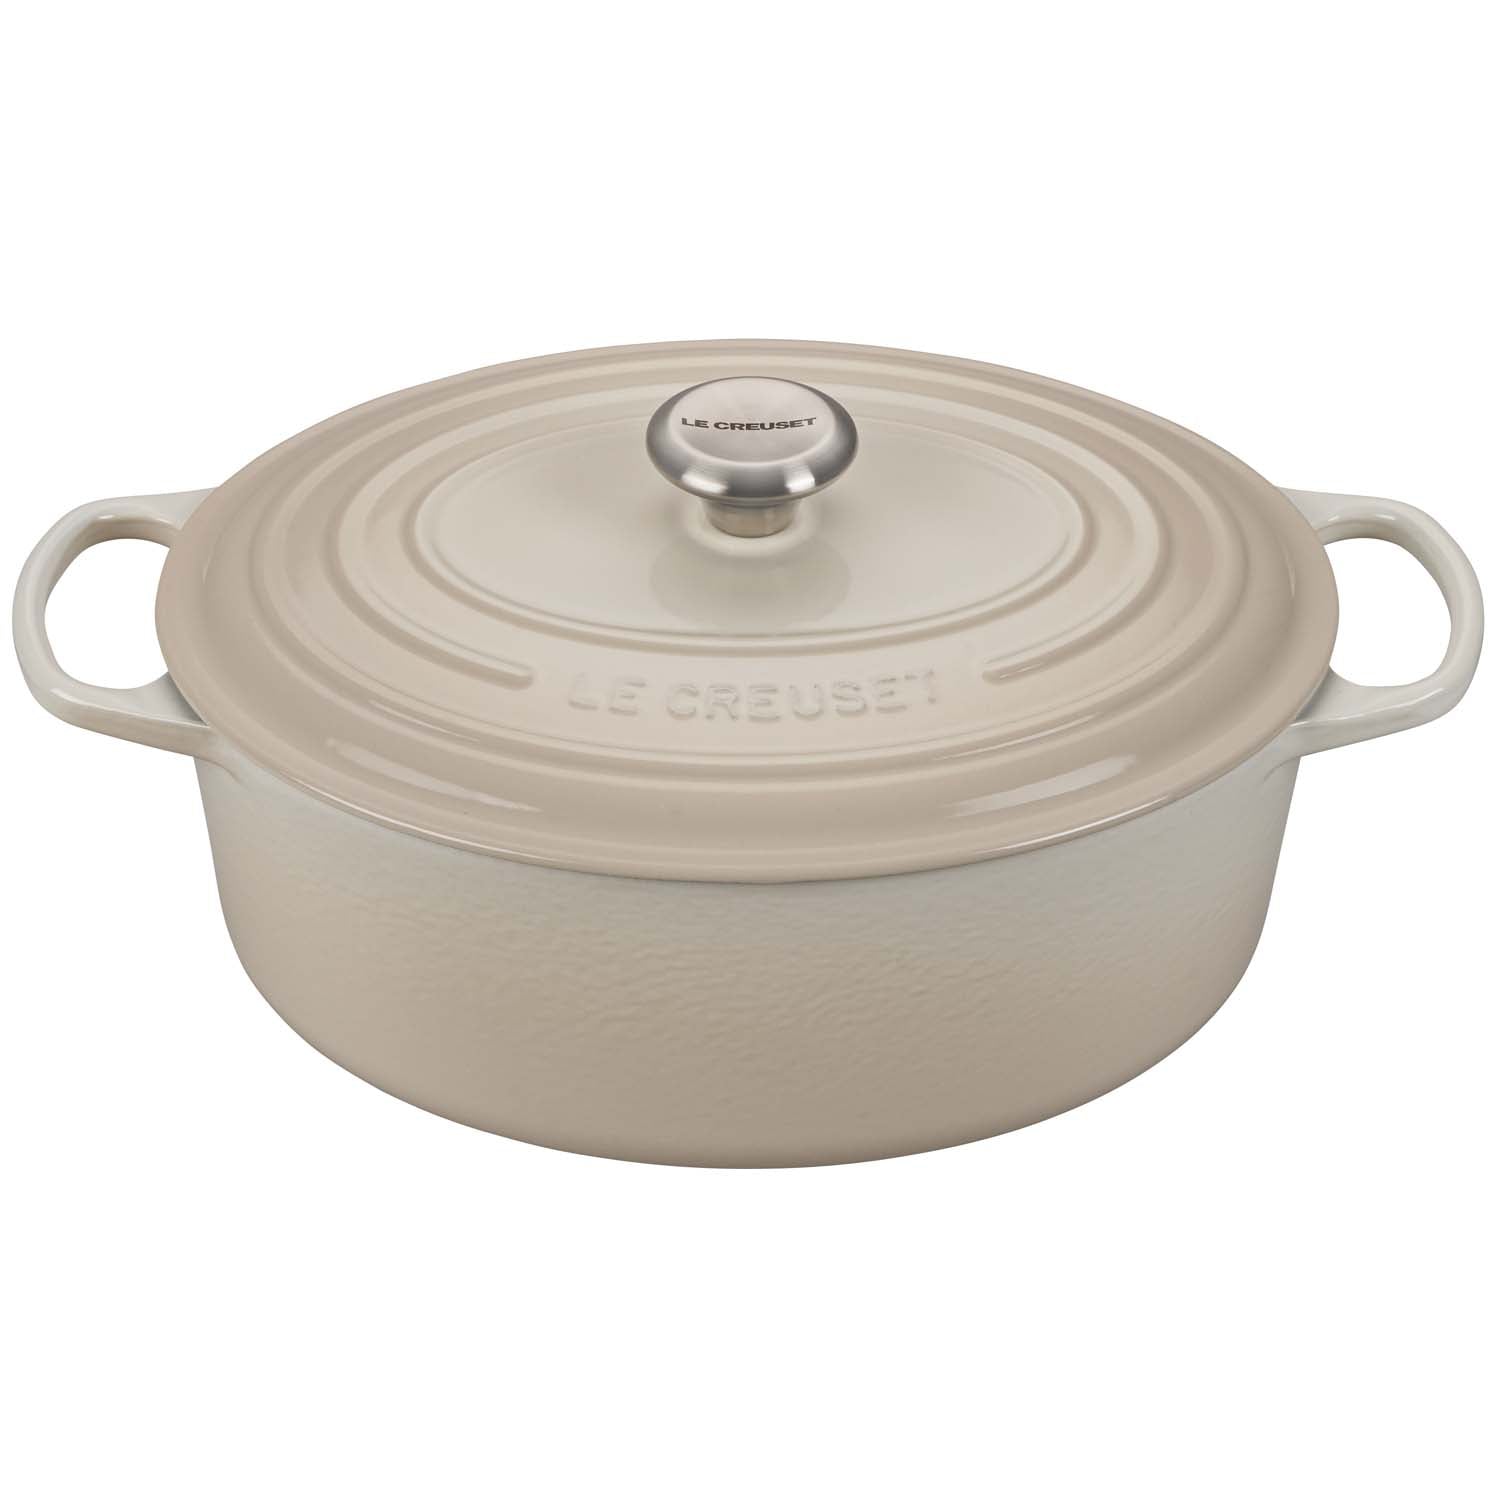 All-Clad on X: It's a slow cooker, it's a dutch oven, it's the NEW All-Clad  Electric Dutch Oven! Combine stovetop to oven cookware with flavorful slow  cooking when using this slow cooker